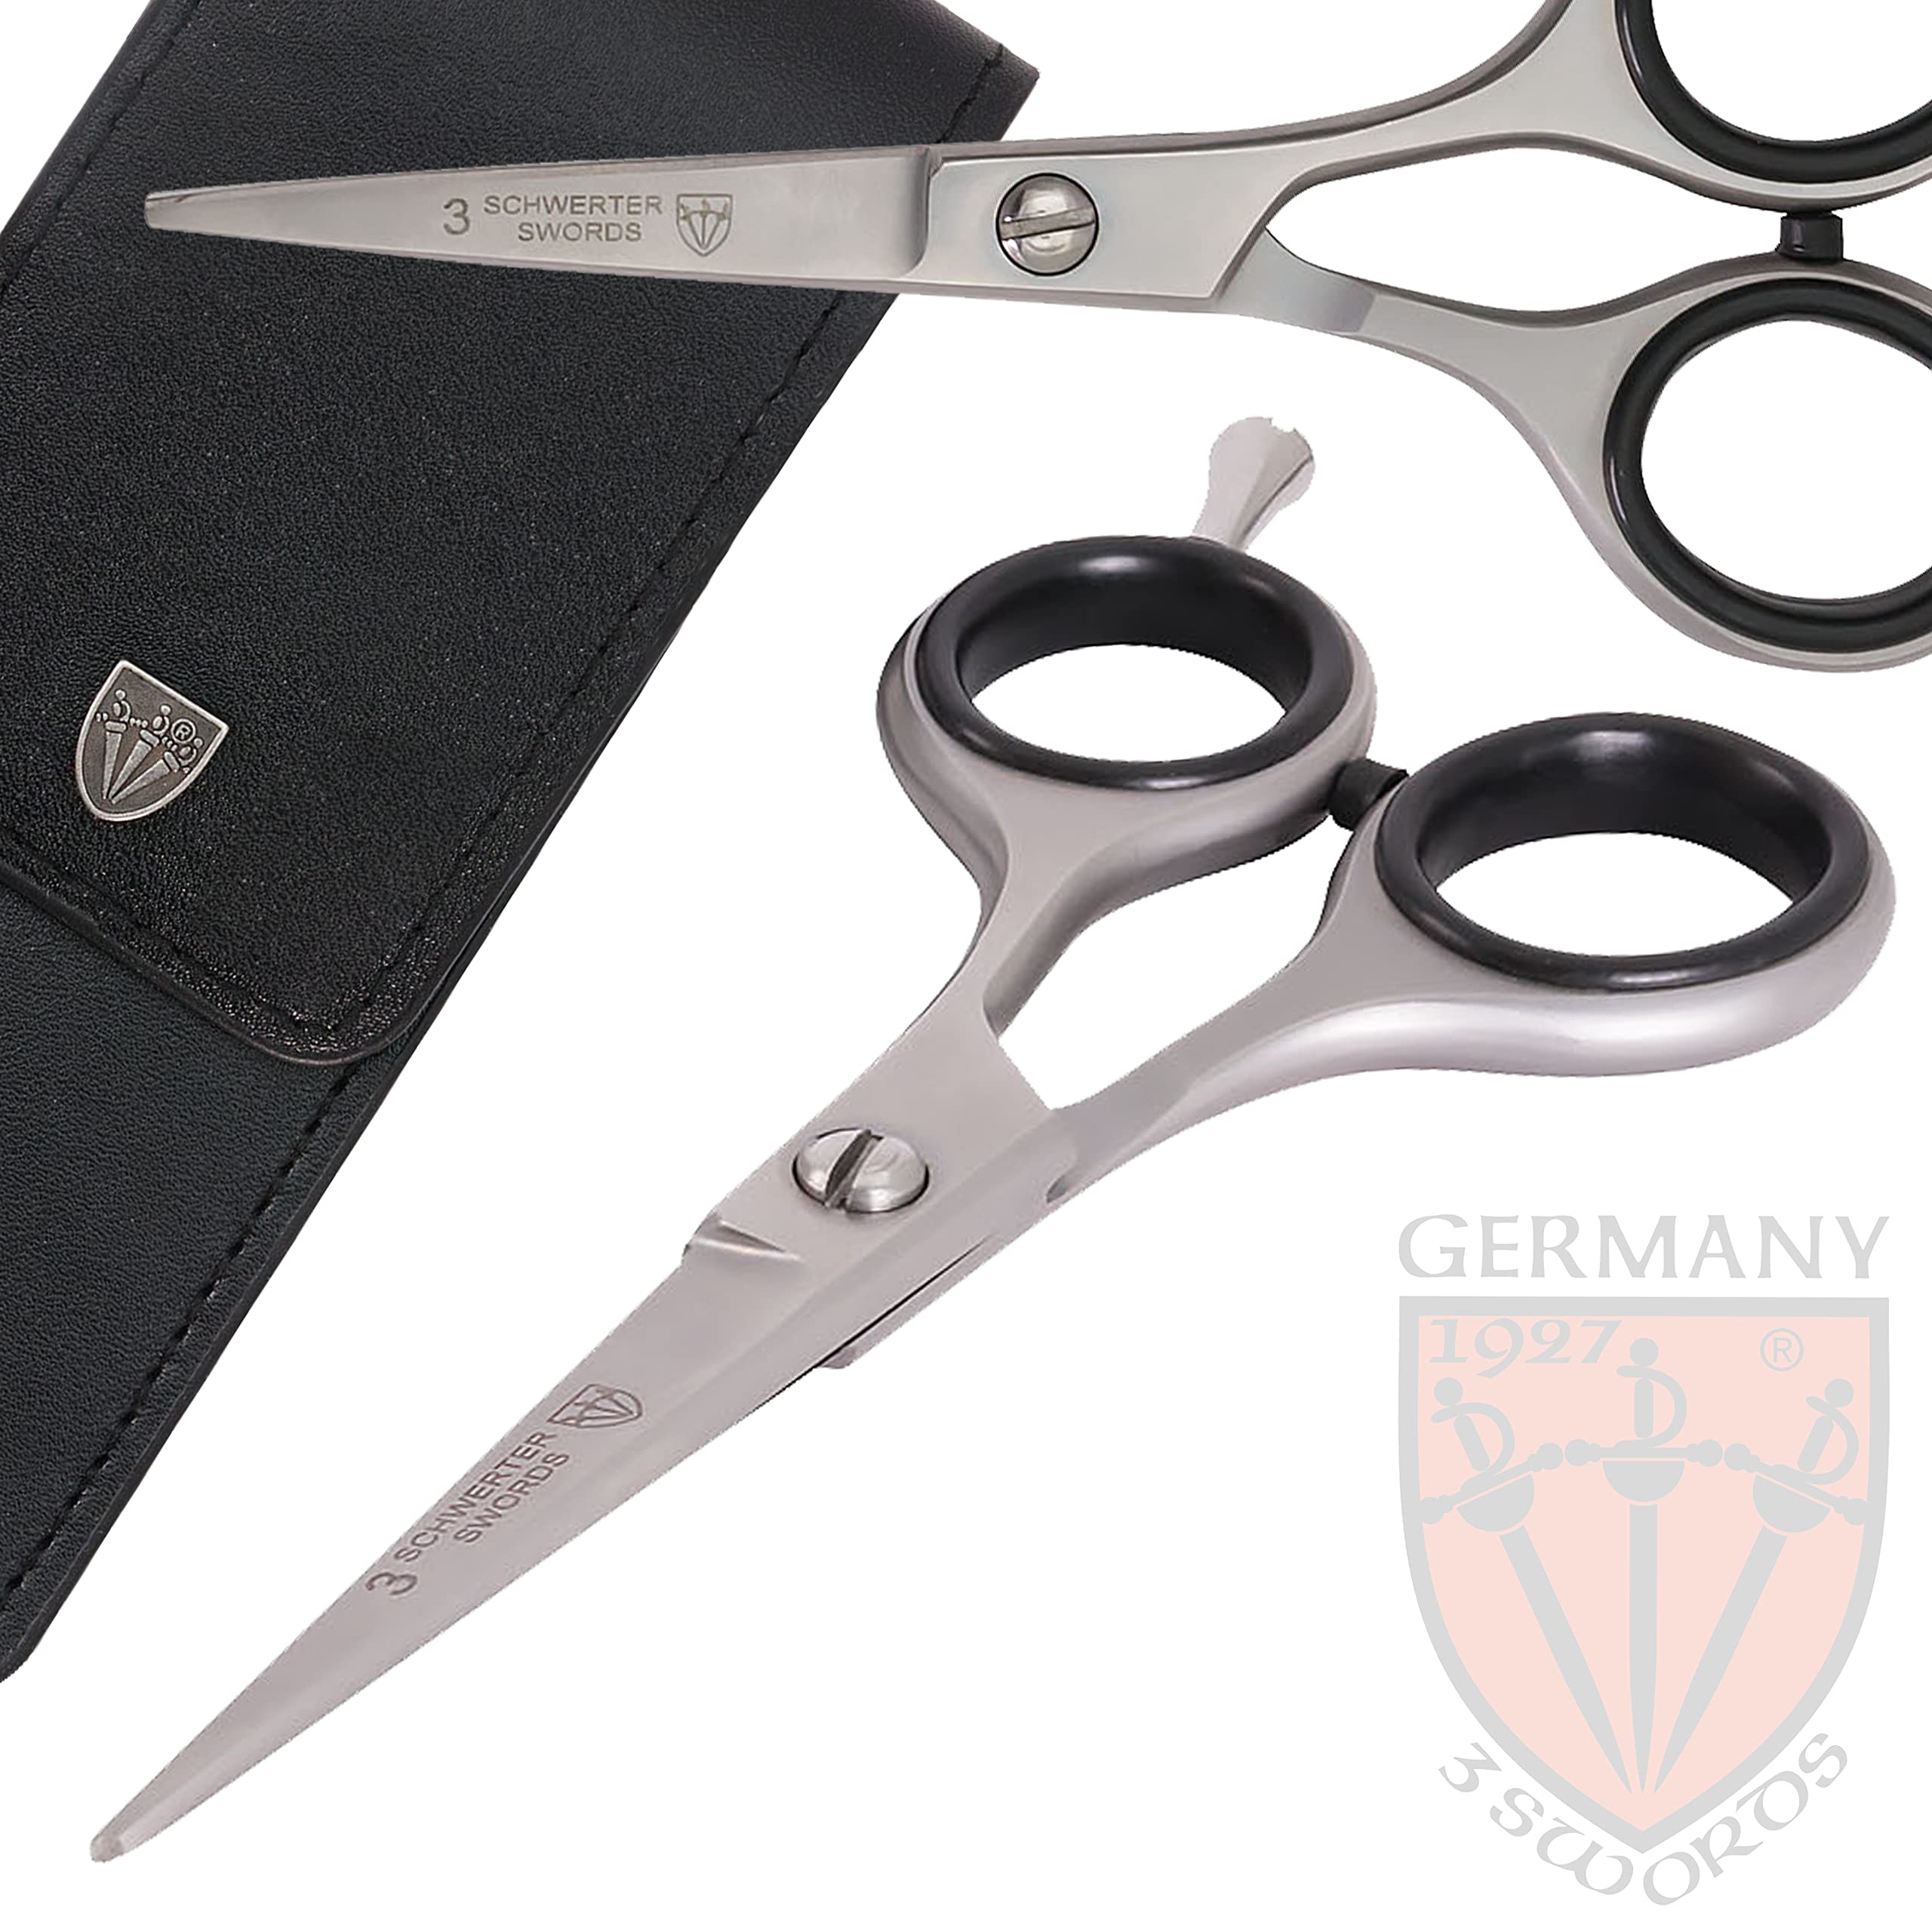 3 Swords Germany – professional BEARD MUSTACHE HAIR SCISSORS, stainless steel, straight blade, sharp, with black case